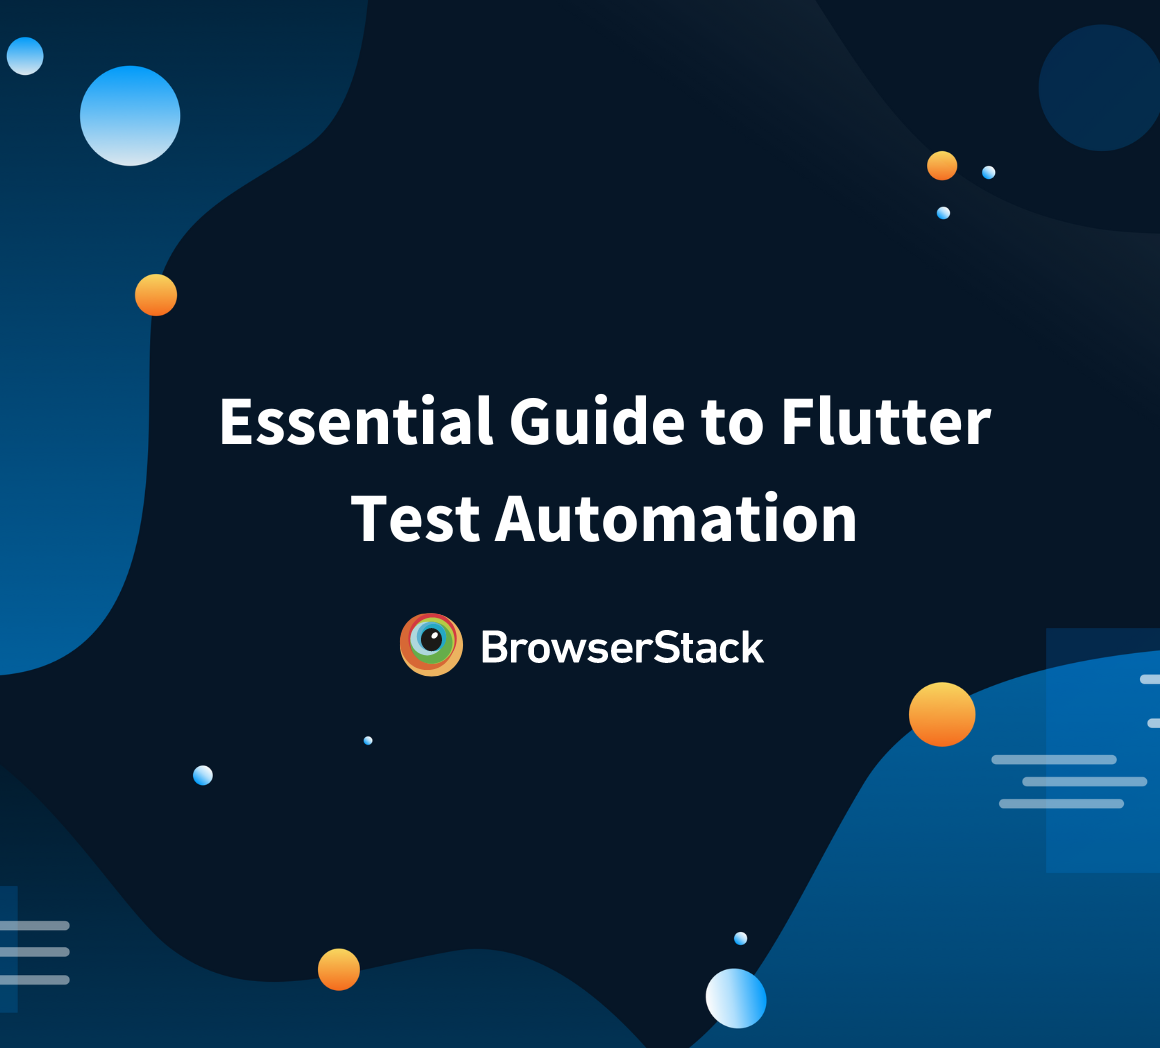 Essential Guide to Flutter Test Automation